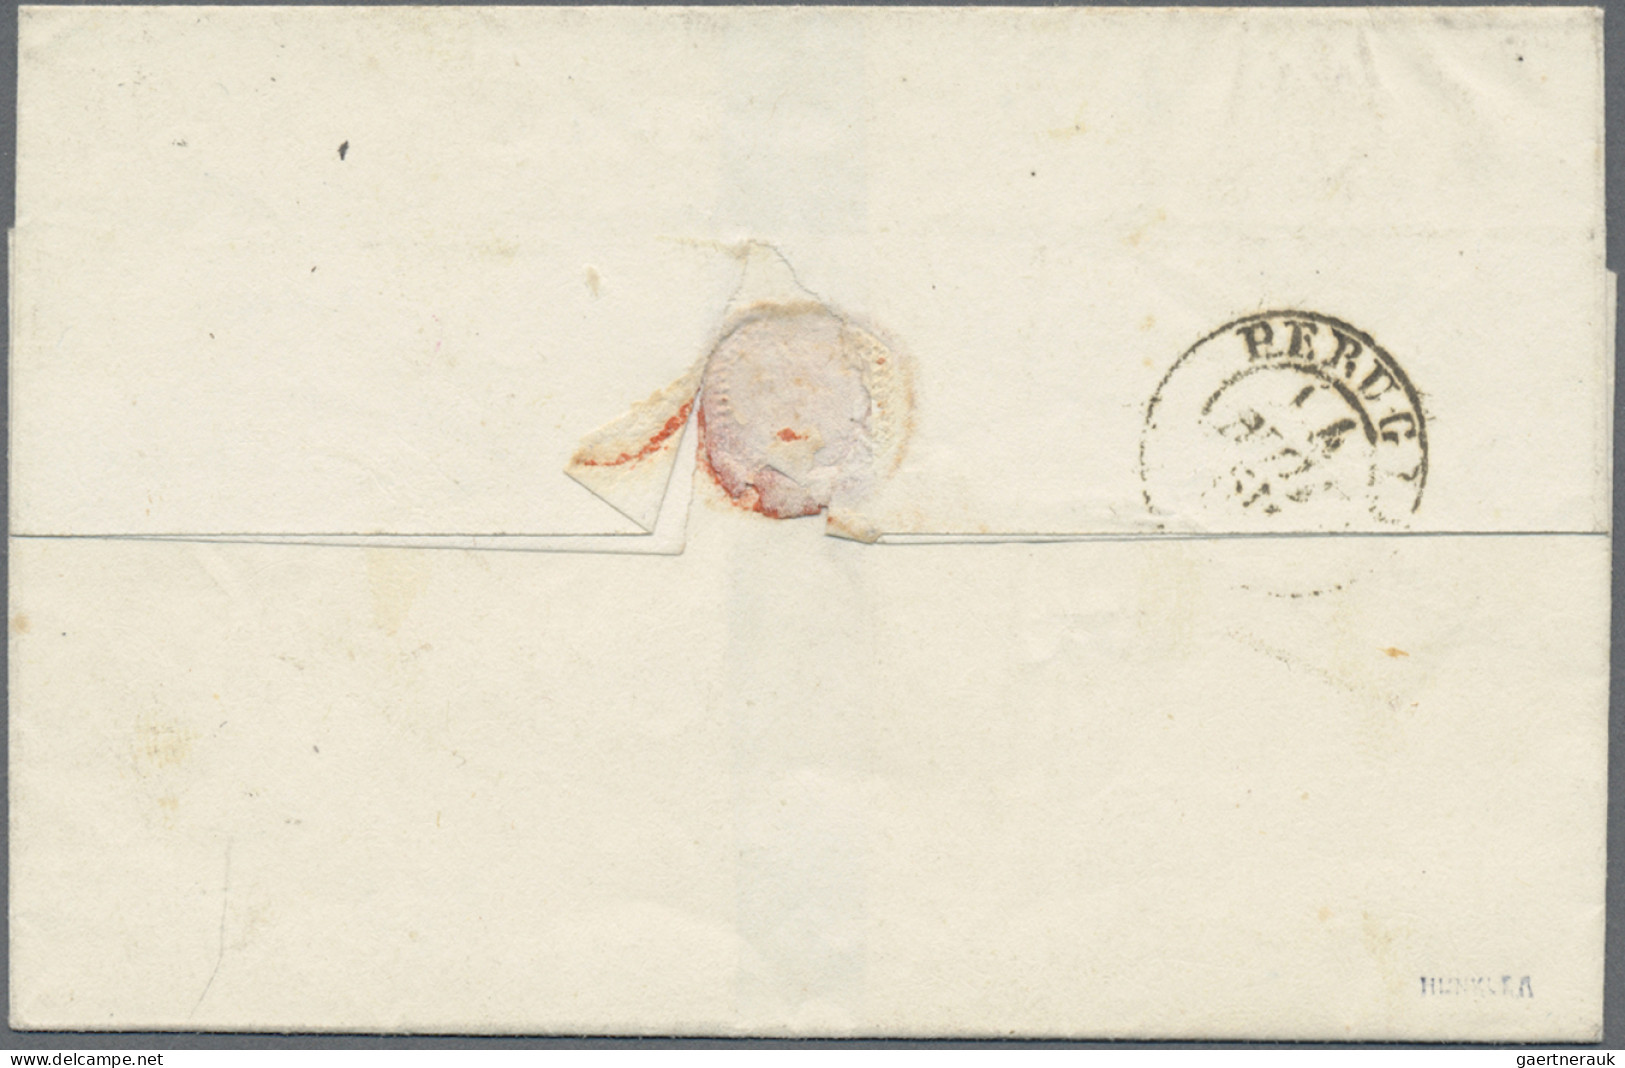 Italian States - Papal State: 1852, four covers from the first issue: a) 5 baj r